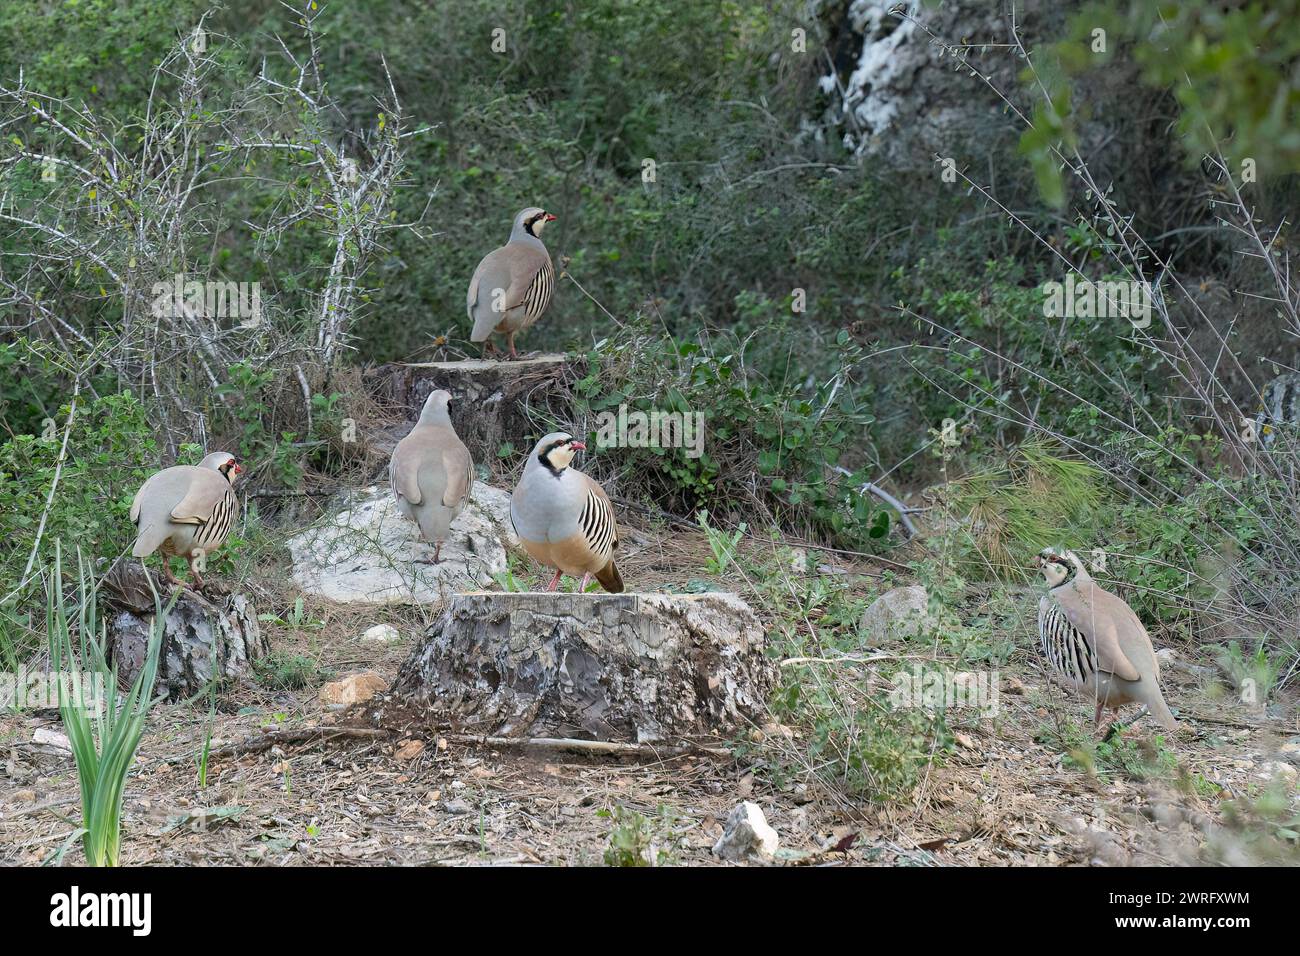 A group of rock partridges among bushes in the Judea mountains, Israel. Stock Photo